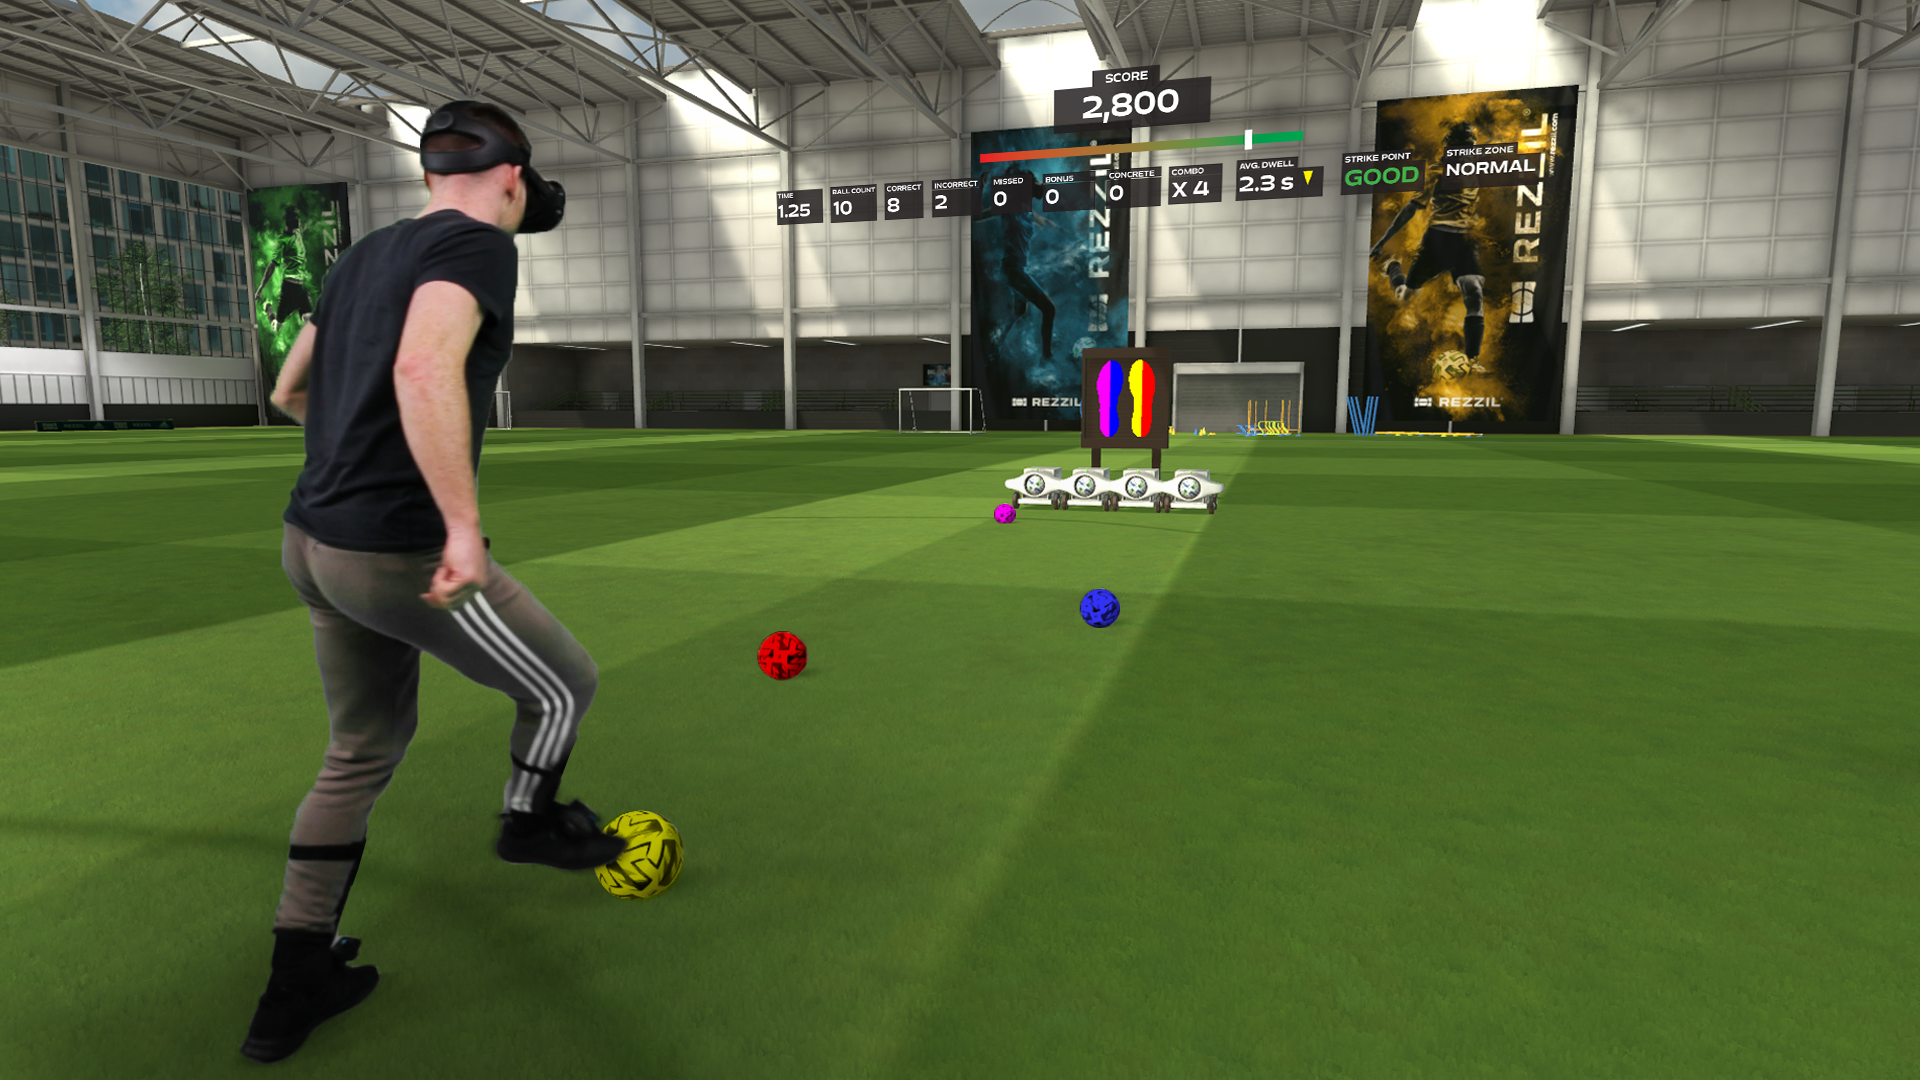 The World's Leading VR Soccer Training Now Free SteamVR - VRScout